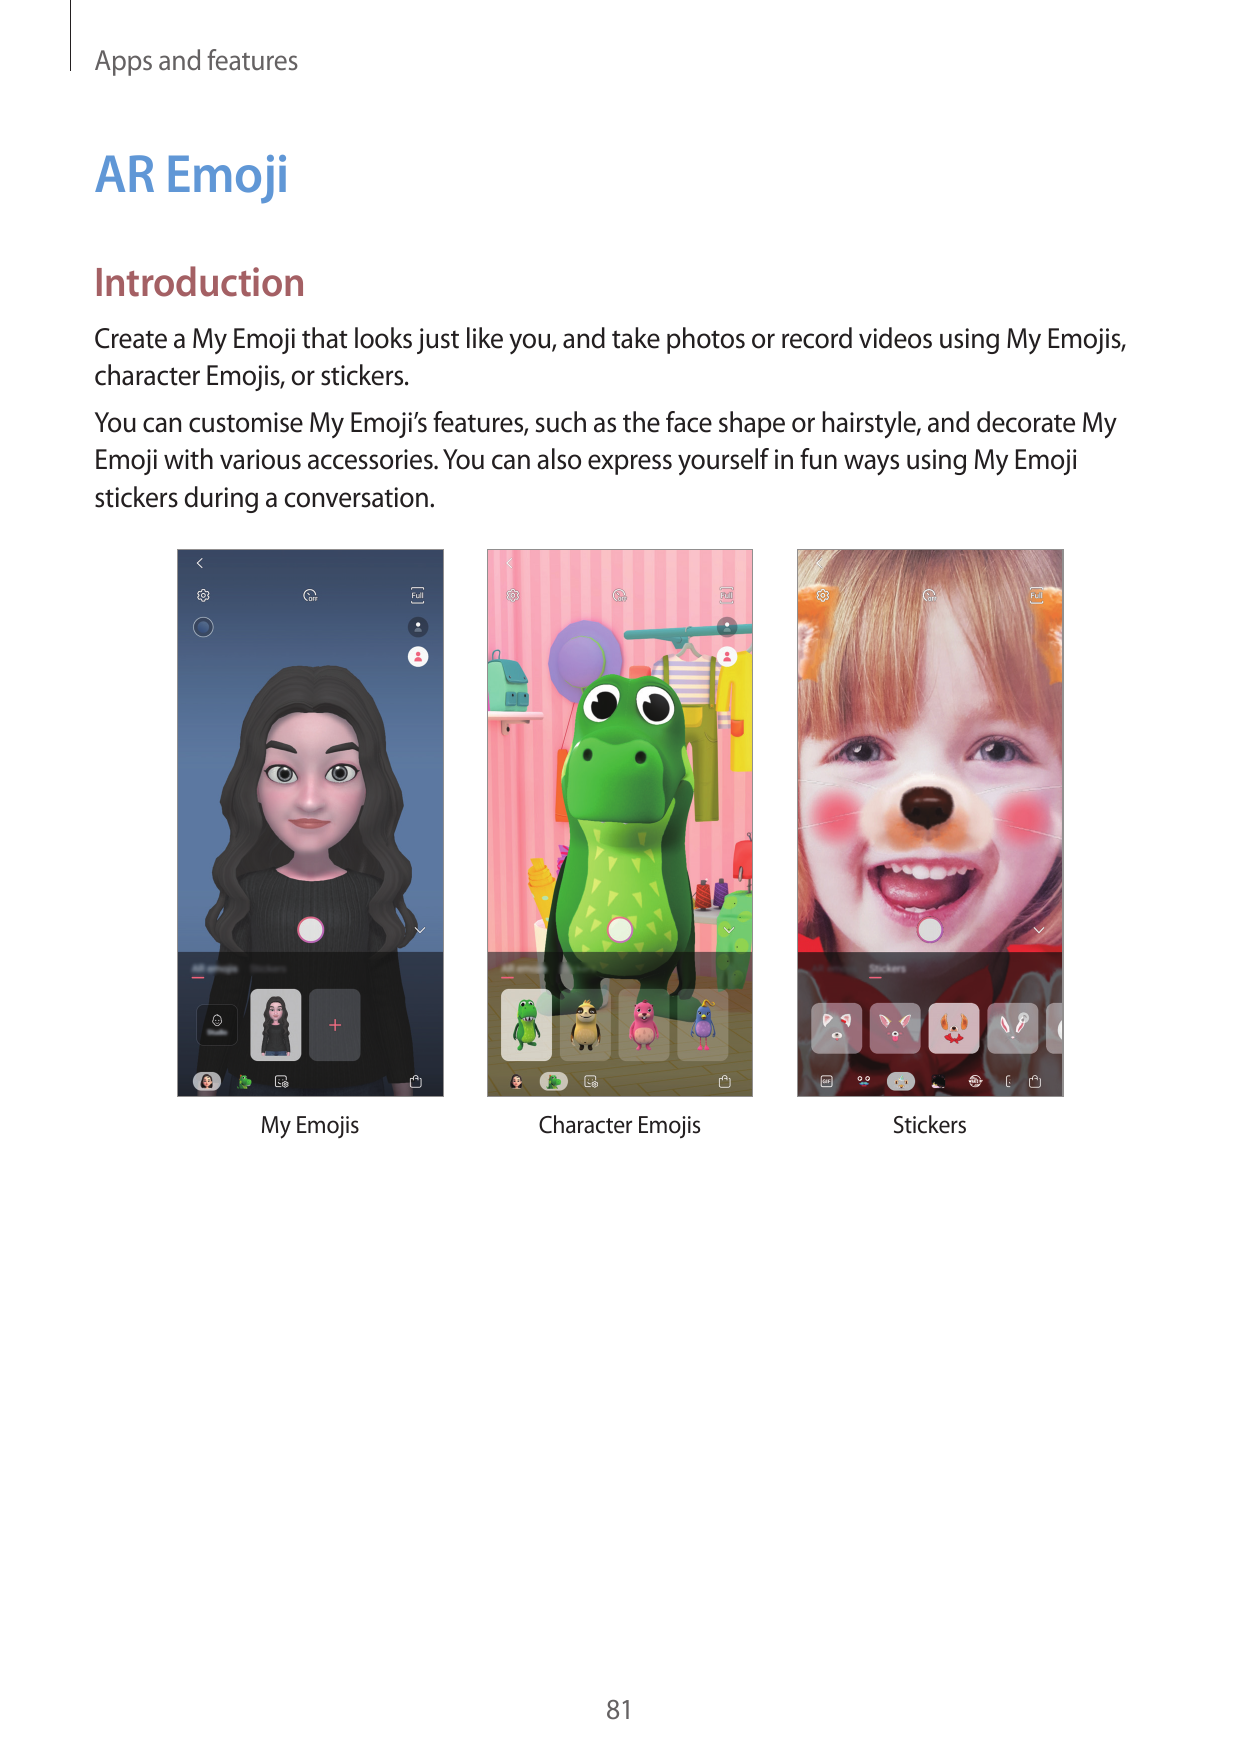 Apps and featuresAR EmojiIntroductionCreate a My Emoji that looks just like you, and take photos or record videos using My Emoji